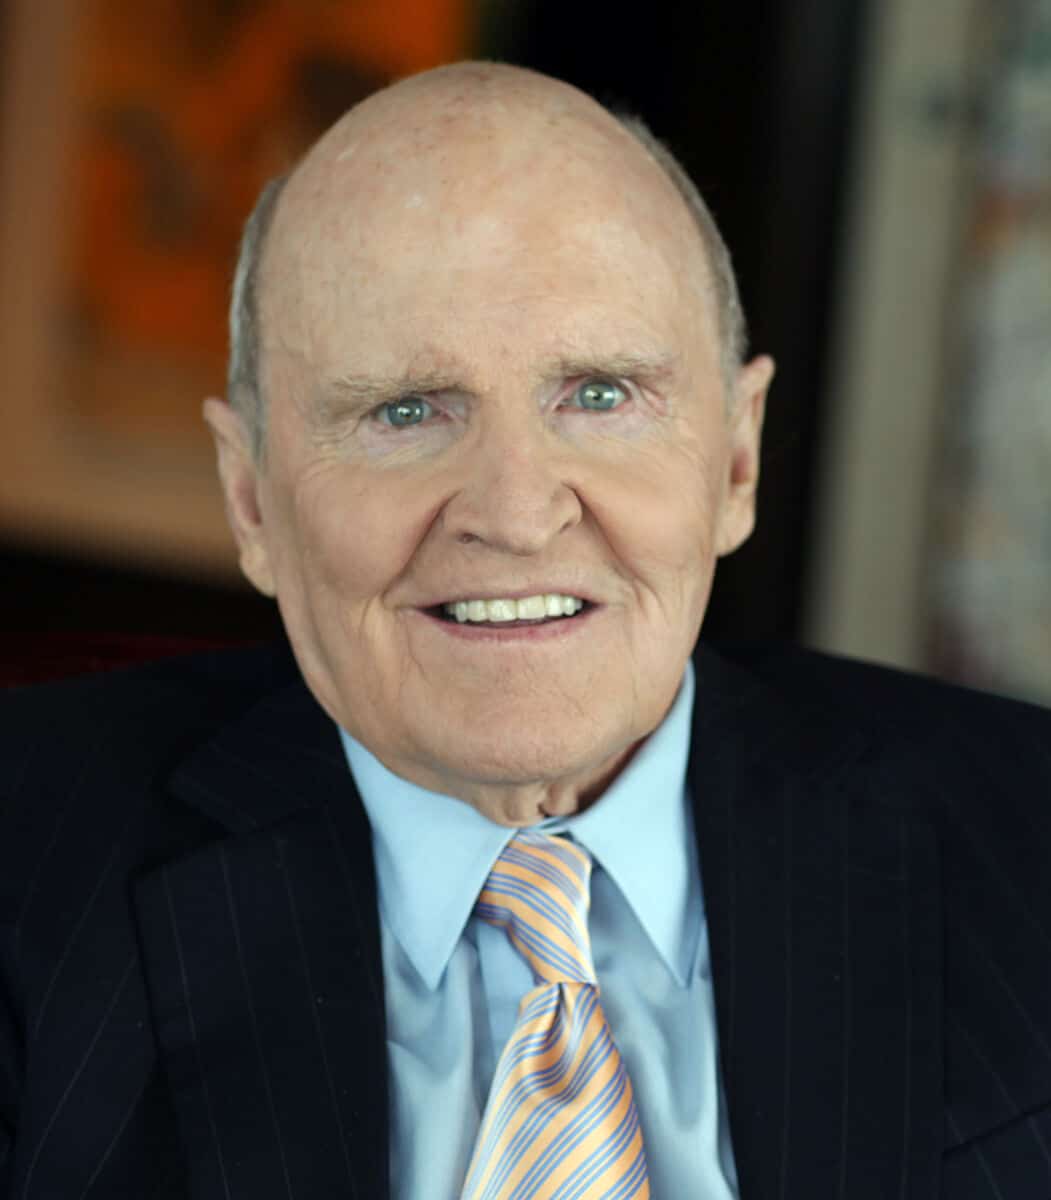 Jack Welch - Famous Businessperson